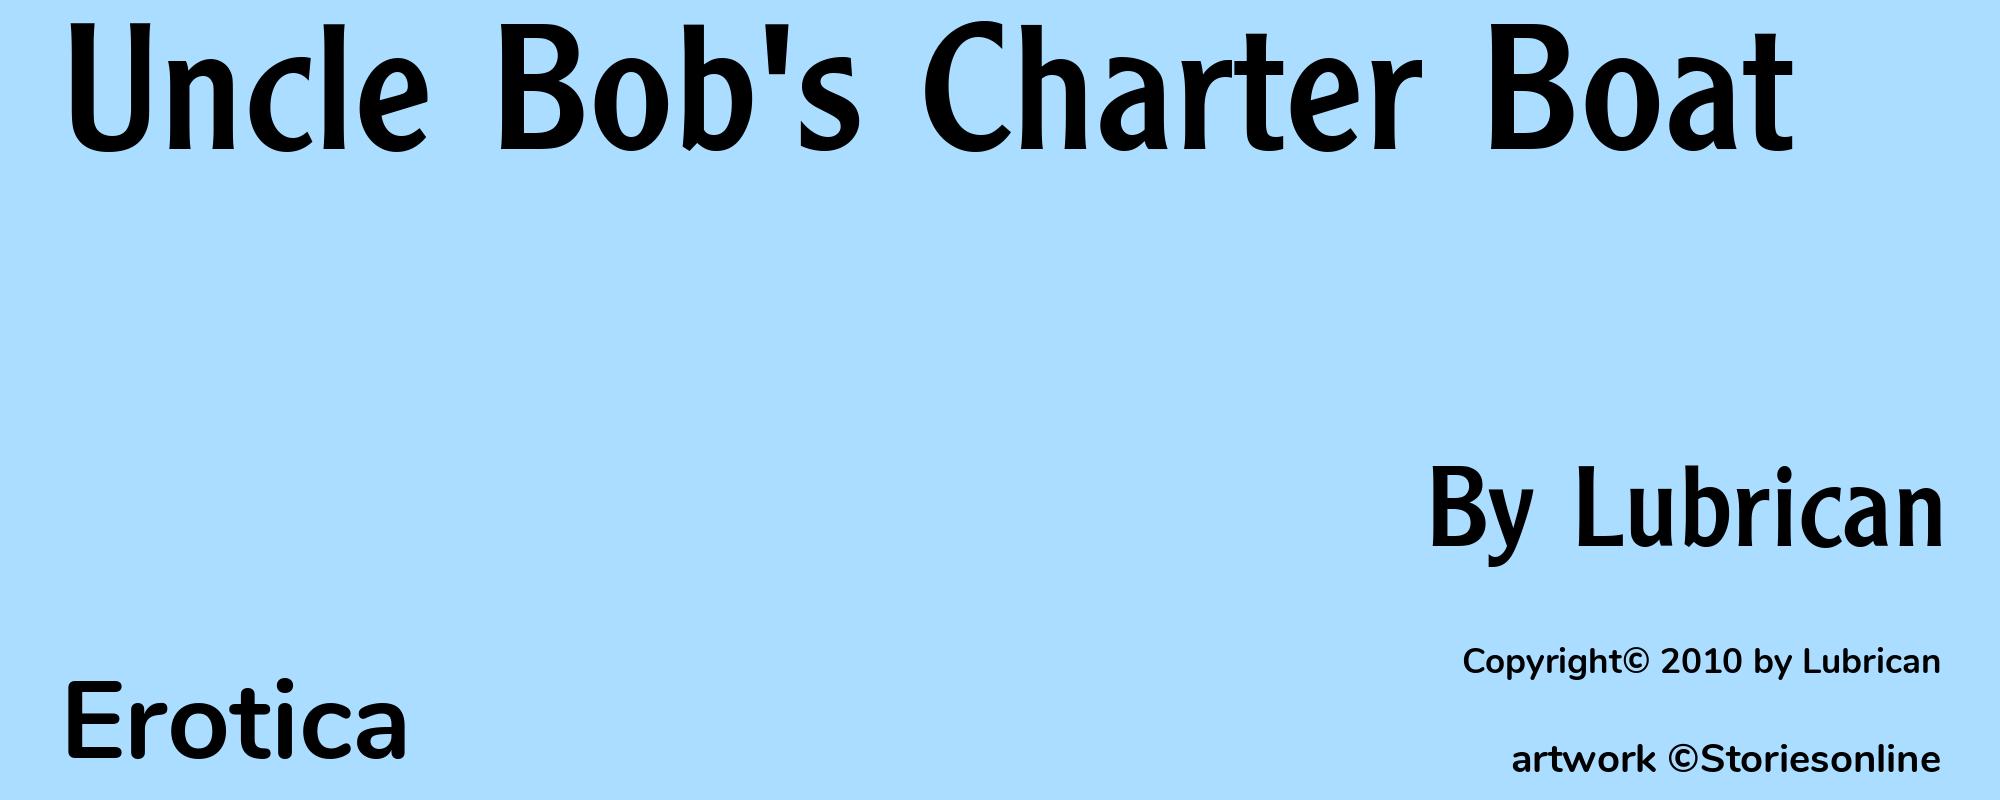 Uncle Bob's Charter Boat - Cover